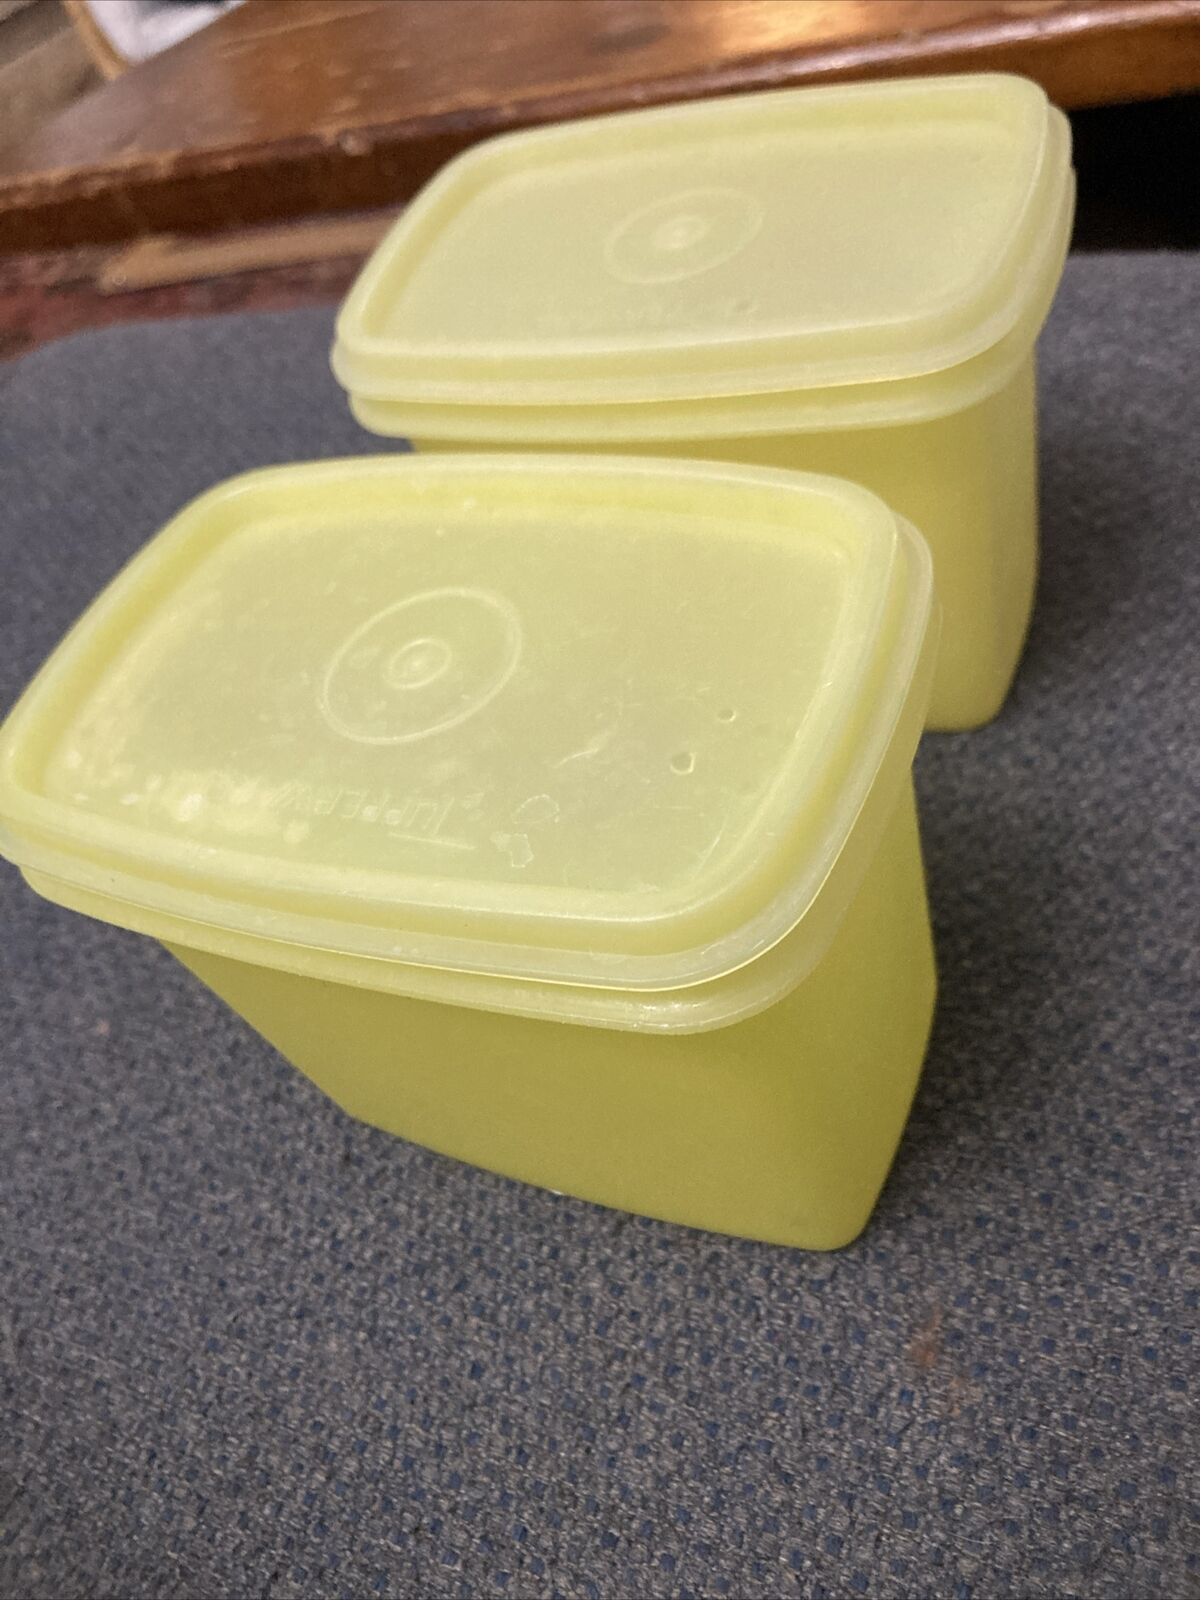 VTG Lot Of 2 Tupperware 1243 Rectangular Containers Storage W/ Lids Yellow Sugar